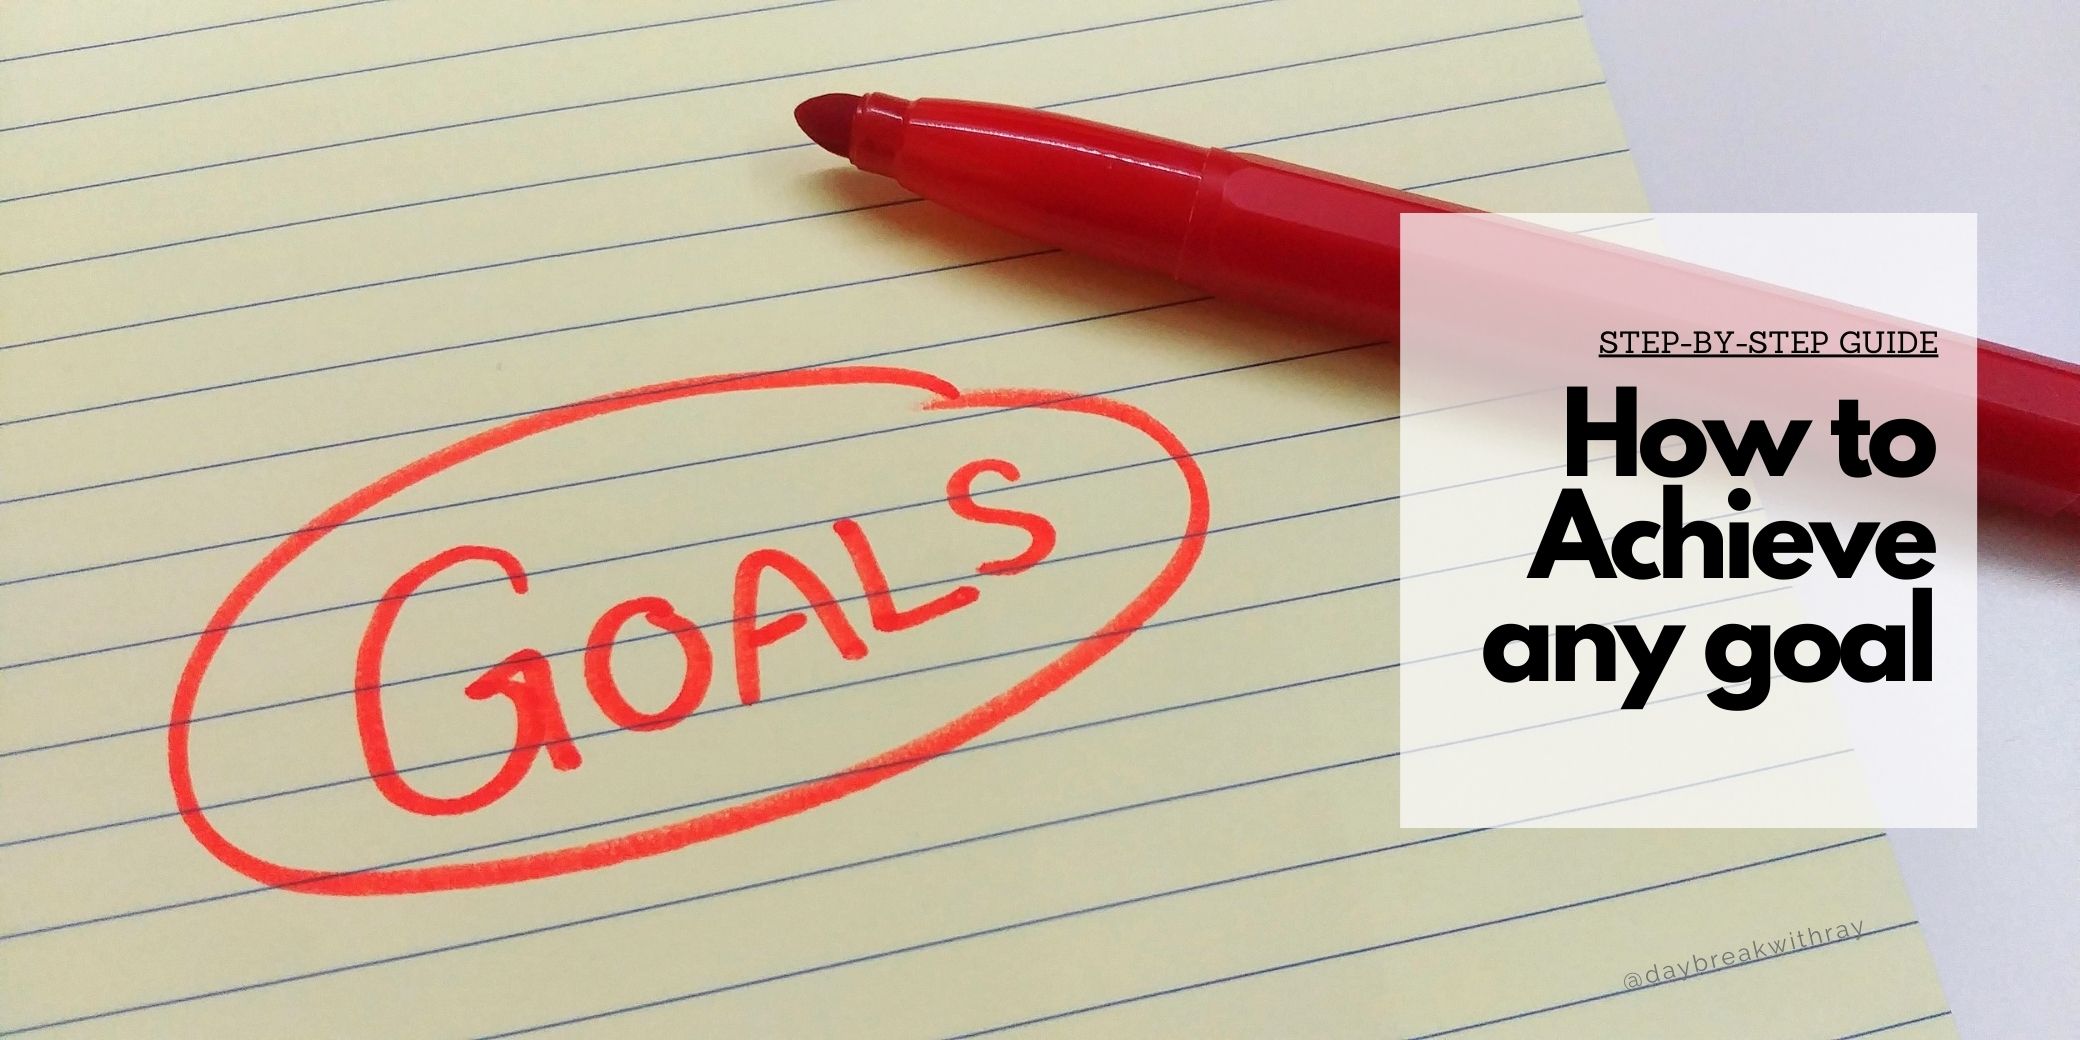 (Featured Image) How to achieve any goal step-by-step